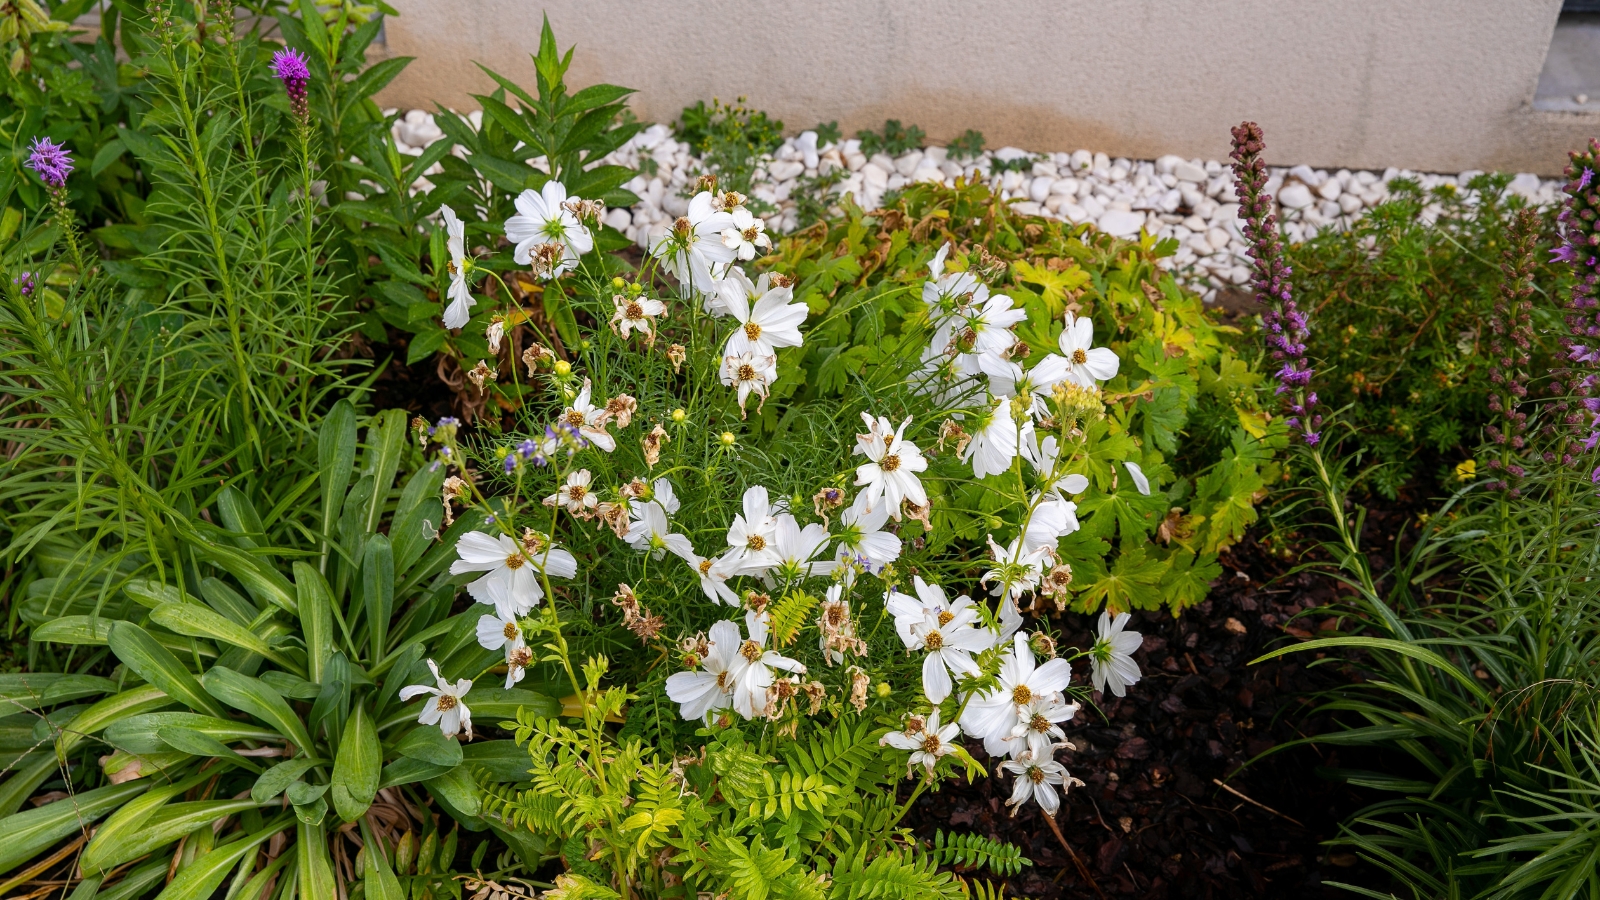 A garden bed hosts various plants, each showcasing unique colors and textures, while a cosmos plant stands out, adorned with delicate white flowers, adding an ethereal touch to the scene.